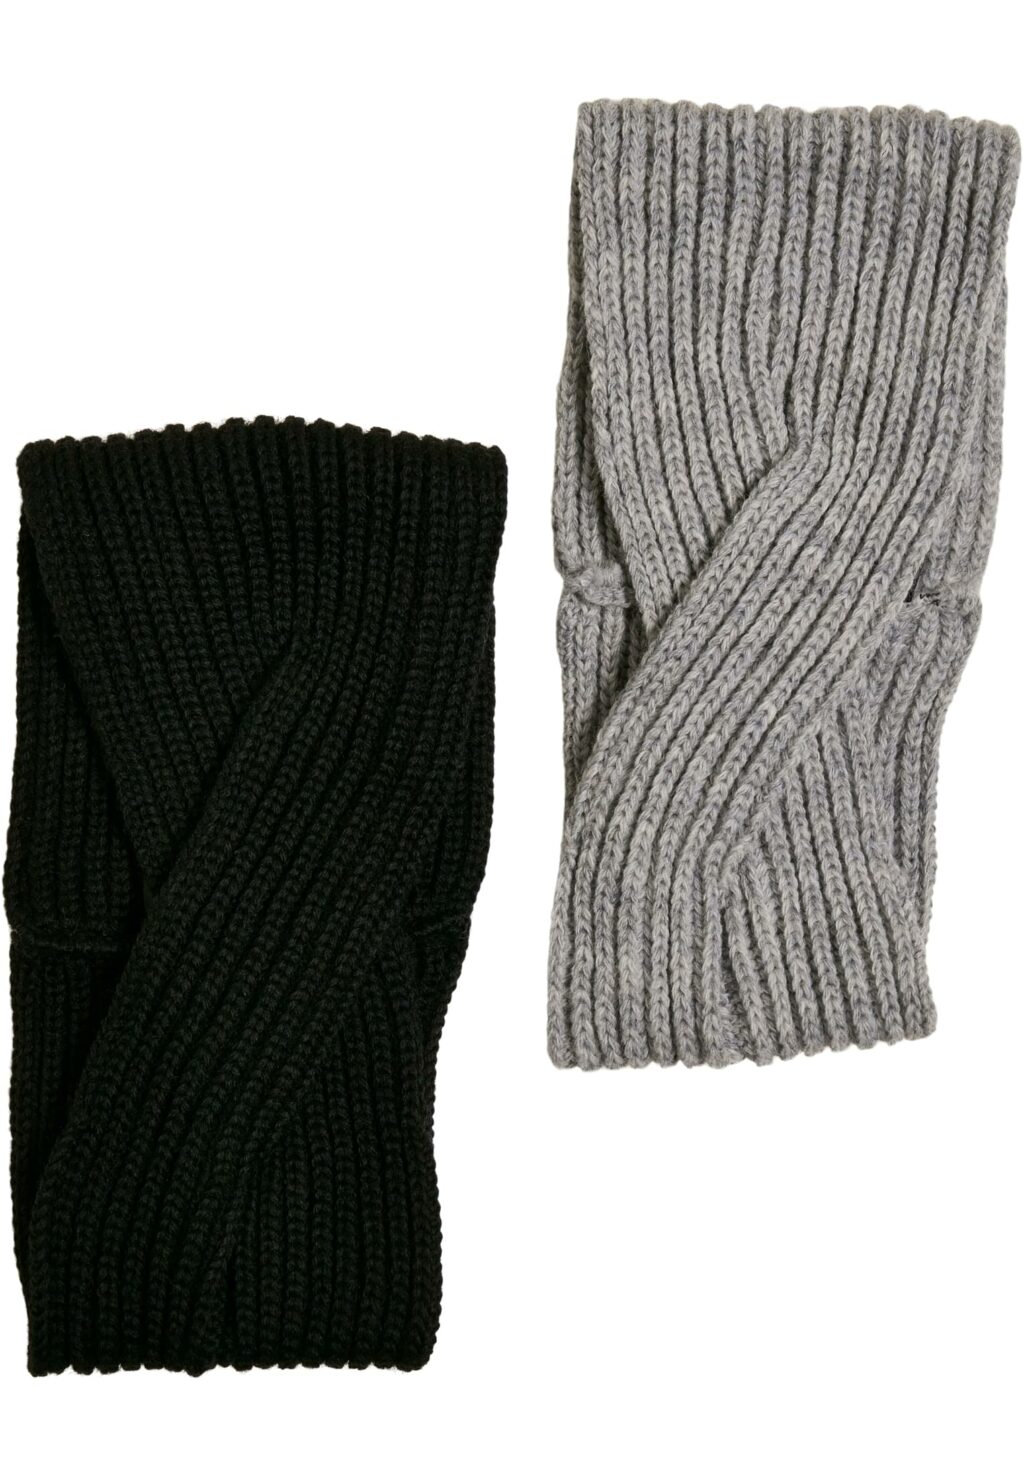 Knitted Headband 2-Pack black/grey one TB4865A